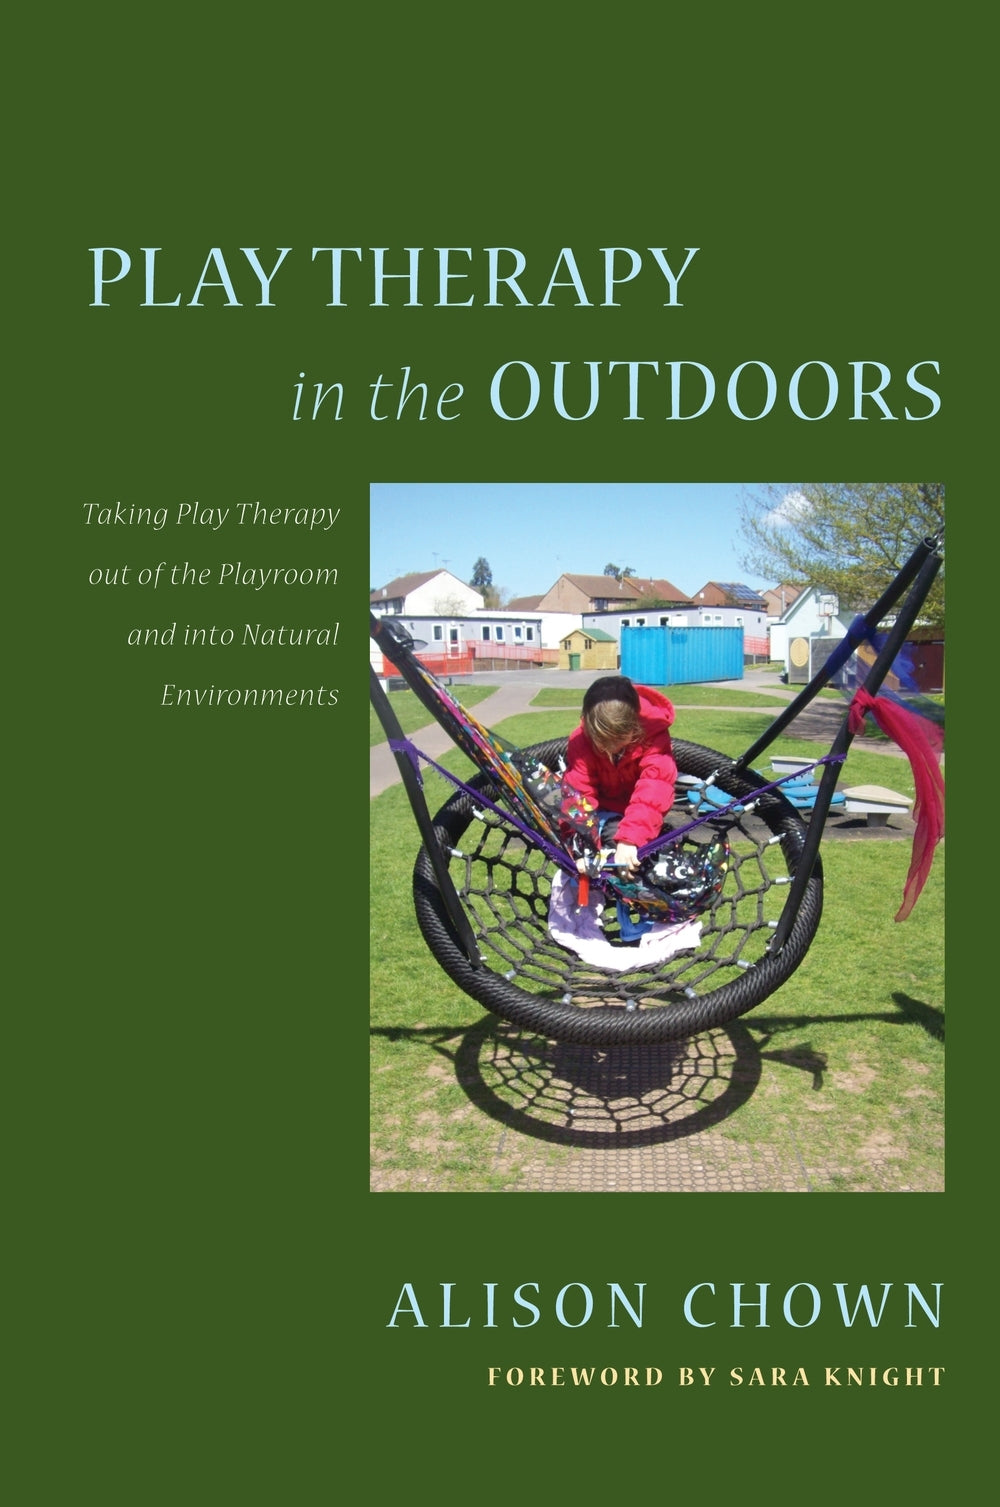 Play Therapy in the Outdoors by Sara Knight, Alison Chown